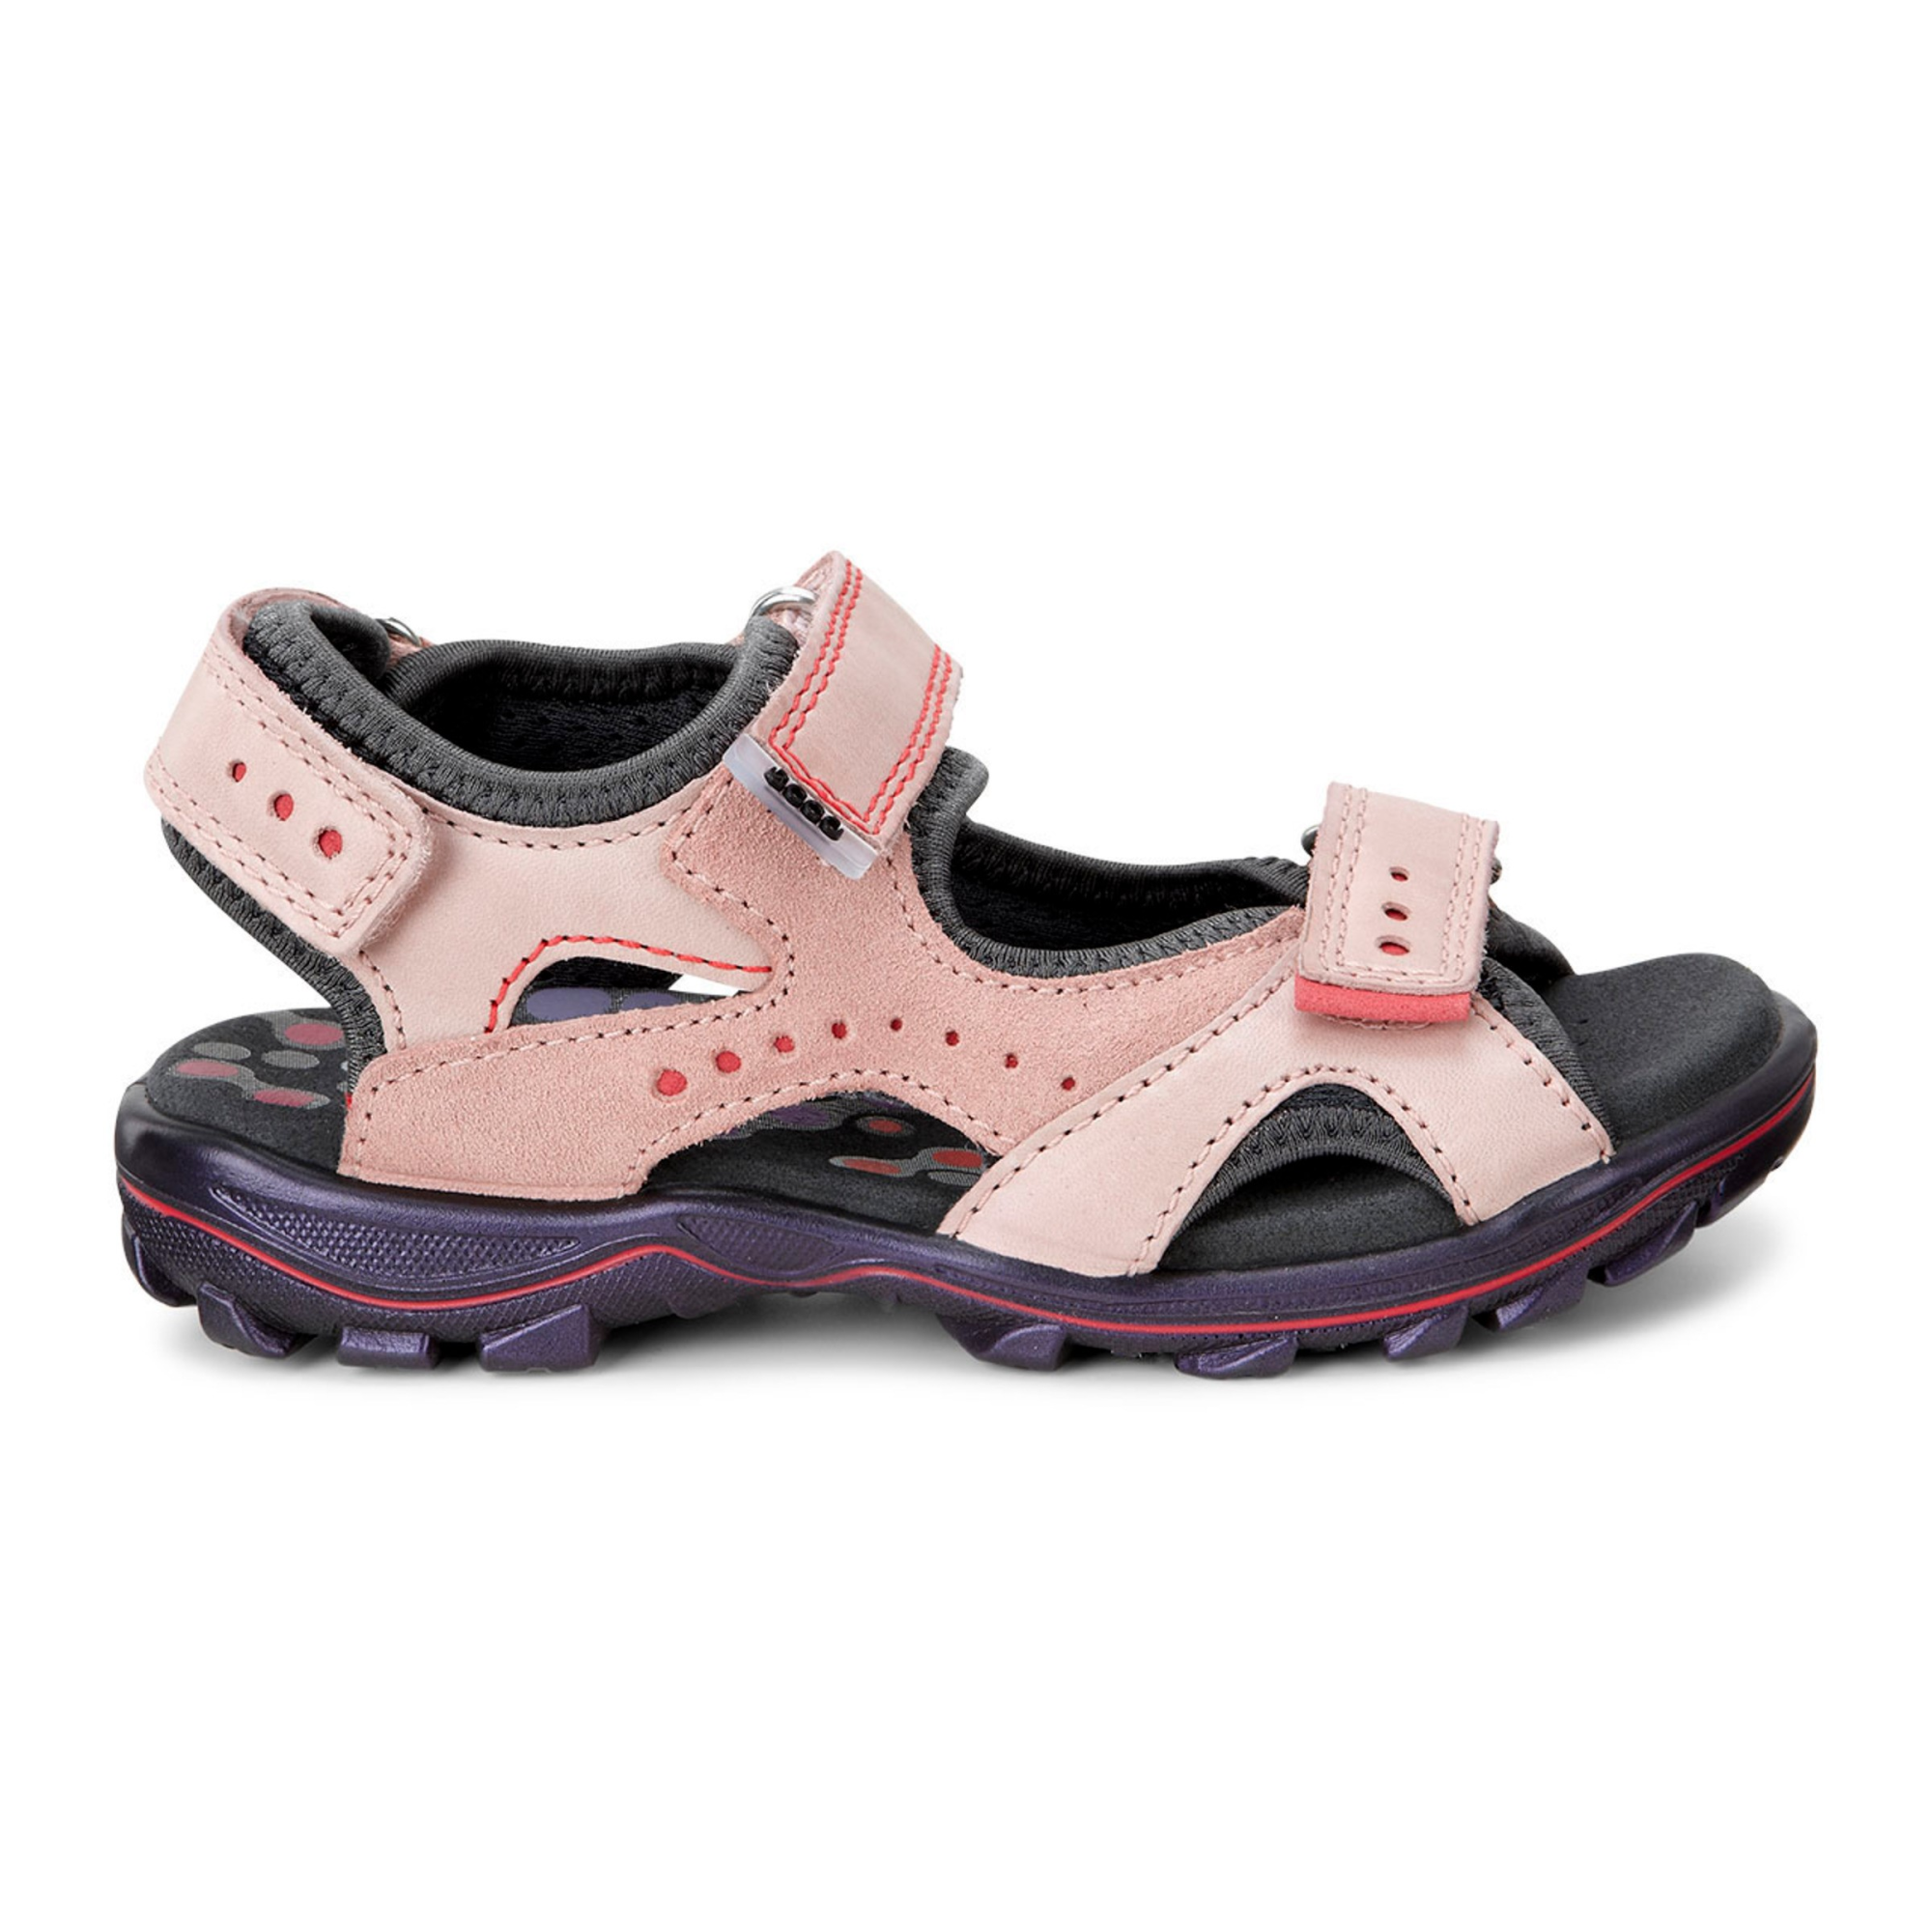 Tegne forsikring Site line Massakre Ecco Urban Safari Sandal 30 - Products - Veryk Mall - Veryk Mall, many  product, quick response, safe your money!